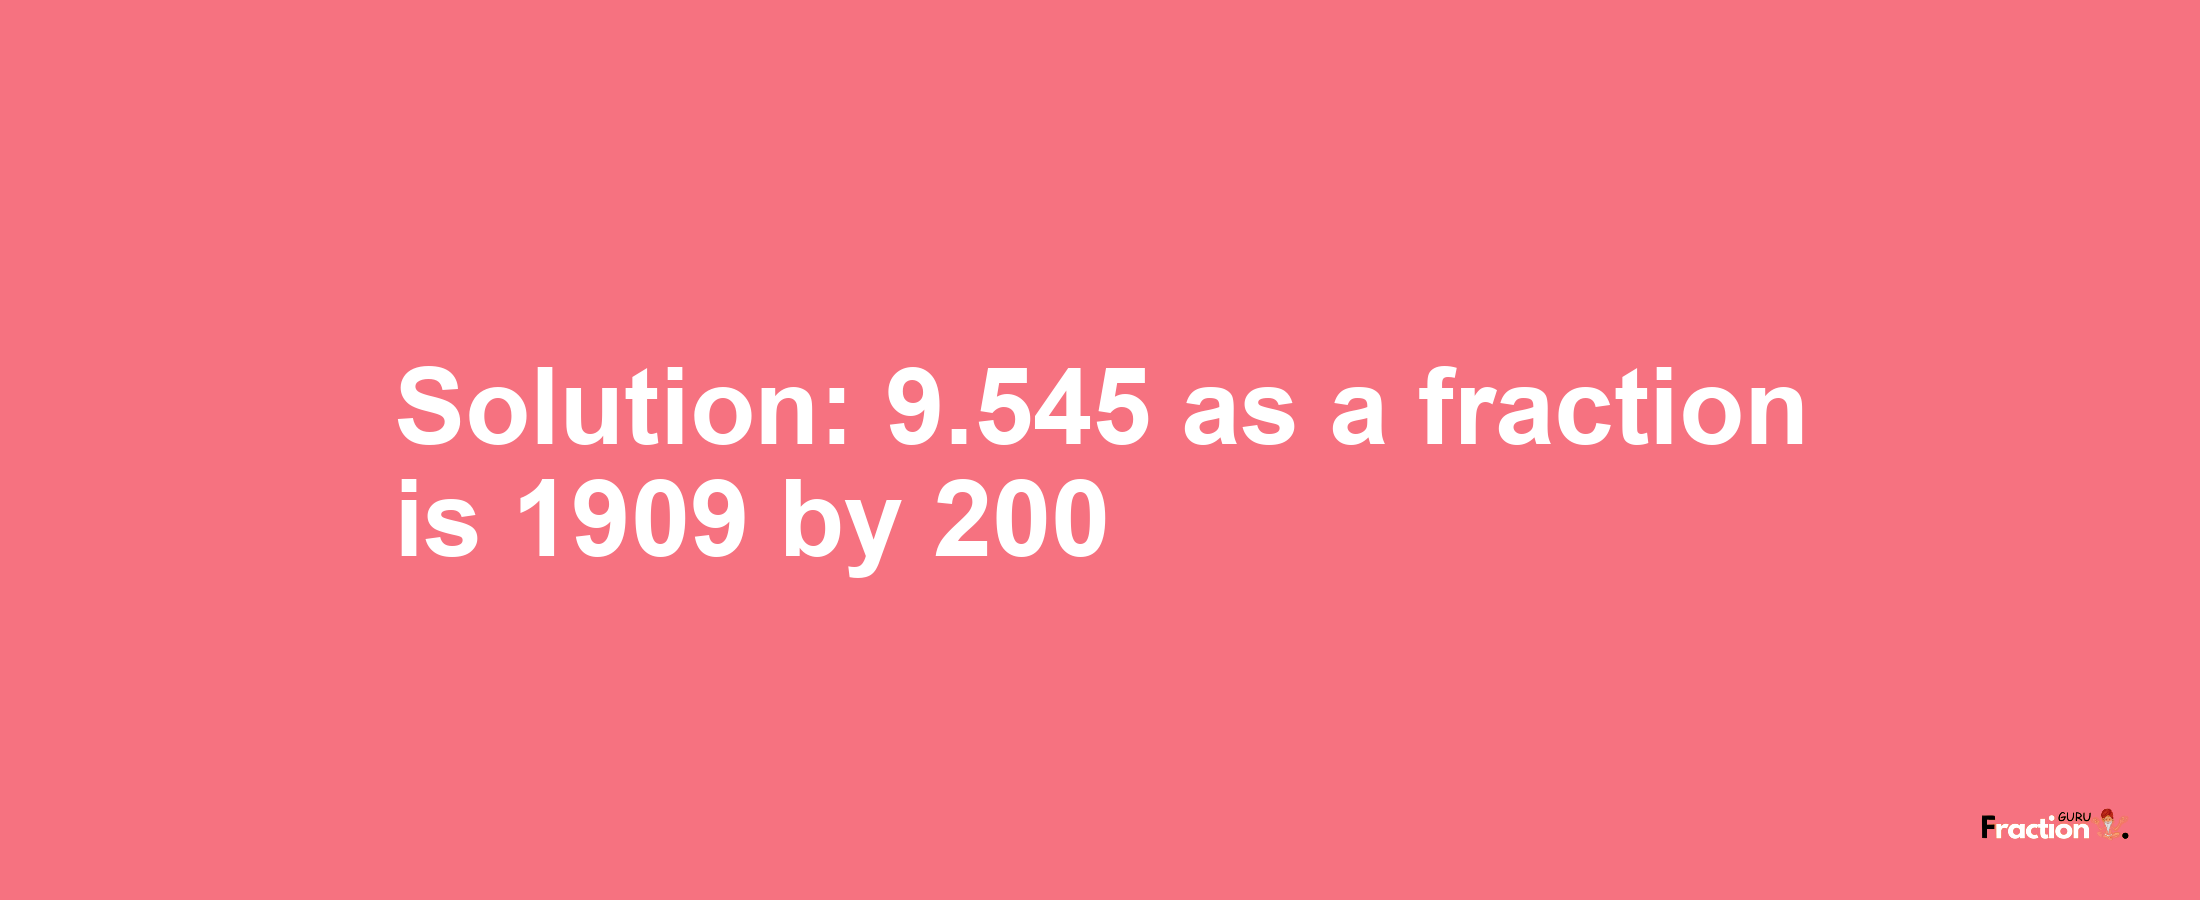 Solution:9.545 as a fraction is 1909/200